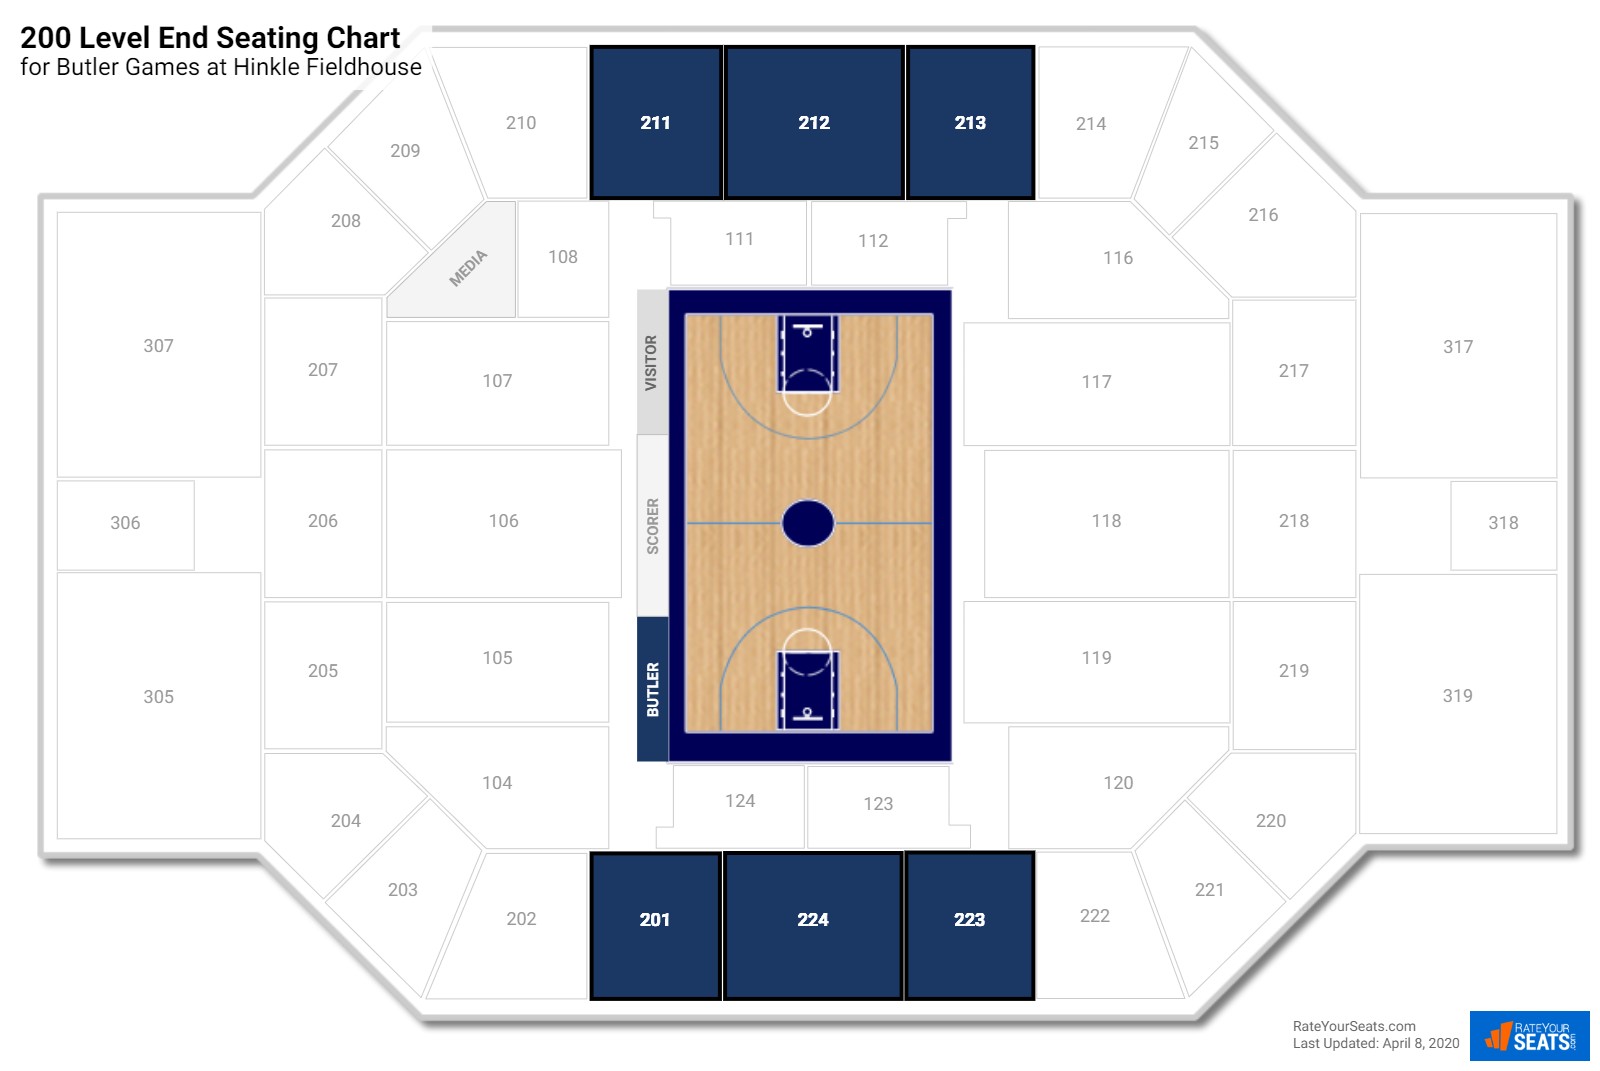 Hinkle Fieldhouse (Butler) Seating Guide - RateYourSeats.com